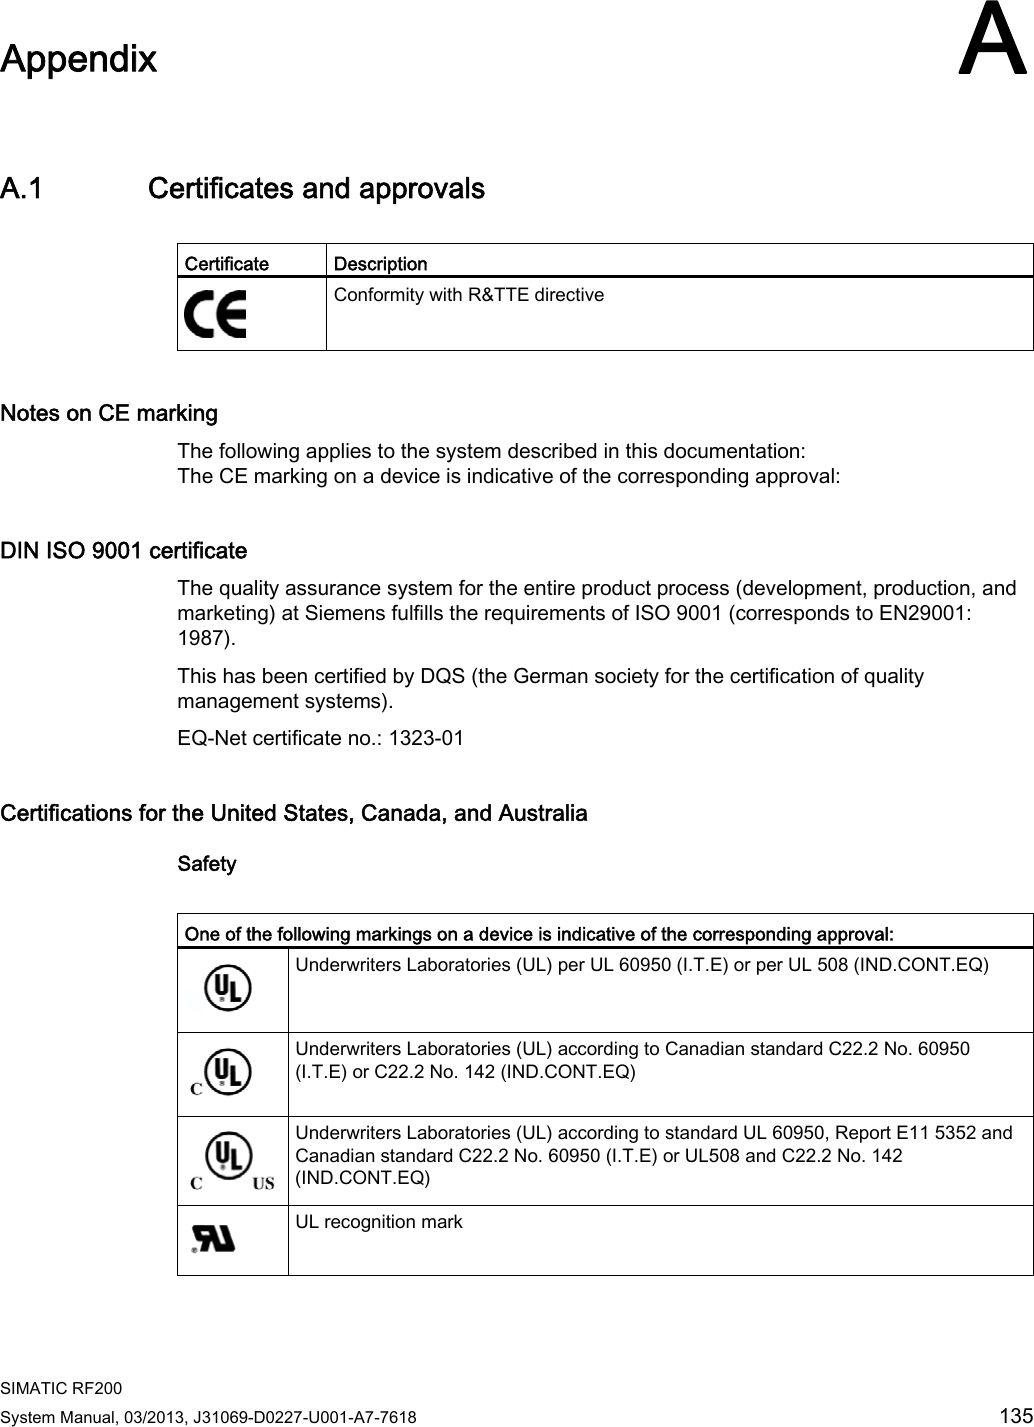  SIMATIC RF200 System Manual, 03/2013, J31069-D0227-U001-A7-7618  135 Appendix AA.1 Certificates and approvals  Certificate  Description  Conformity with R&amp;TTE directive Notes on CE marking The following applies to the system described in this documentation:  The CE marking on a device is indicative of the corresponding approval: DIN ISO 9001 certificate    The quality assurance system for the entire product process (development, production, and marketing) at Siemens fulfills the requirements of ISO 9001 (corresponds to EN29001: 1987). This has been certified by DQS (the German society for the certification of quality management systems). EQ-Net certificate no.: 1323-01 Certifications for the United States, Canada, and Australia Safety  One of the following markings on a device is indicative of the corresponding approval:  Underwriters Laboratories (UL) per UL 60950 (I.T.E) or per UL 508 (IND.CONT.EQ)  Underwriters Laboratories (UL) according to Canadian standard C22.2 No. 60950 (I.T.E) or C22.2 No. 142 (IND.CONT.EQ)  Underwriters Laboratories (UL) according to standard UL 60950, Report E11 5352 and Canadian standard C22.2 No. 60950 (I.T.E) or UL508 and C22.2 No. 142 (IND.CONT.EQ)  UL recognition mark 